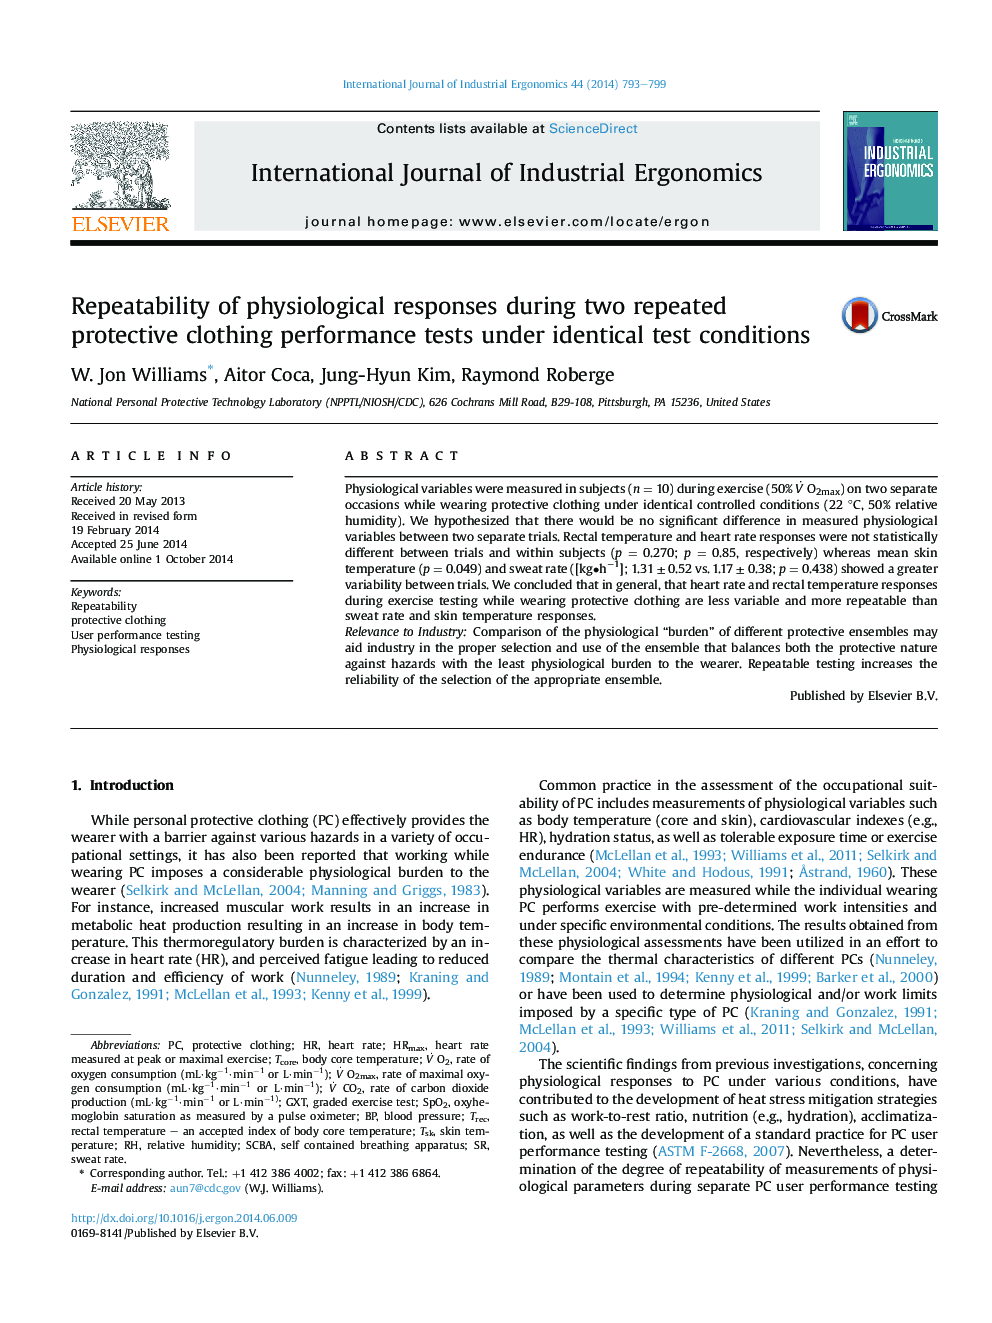 Repeatability of physiological responses during two repeated protective clothing performance tests under identical test conditions